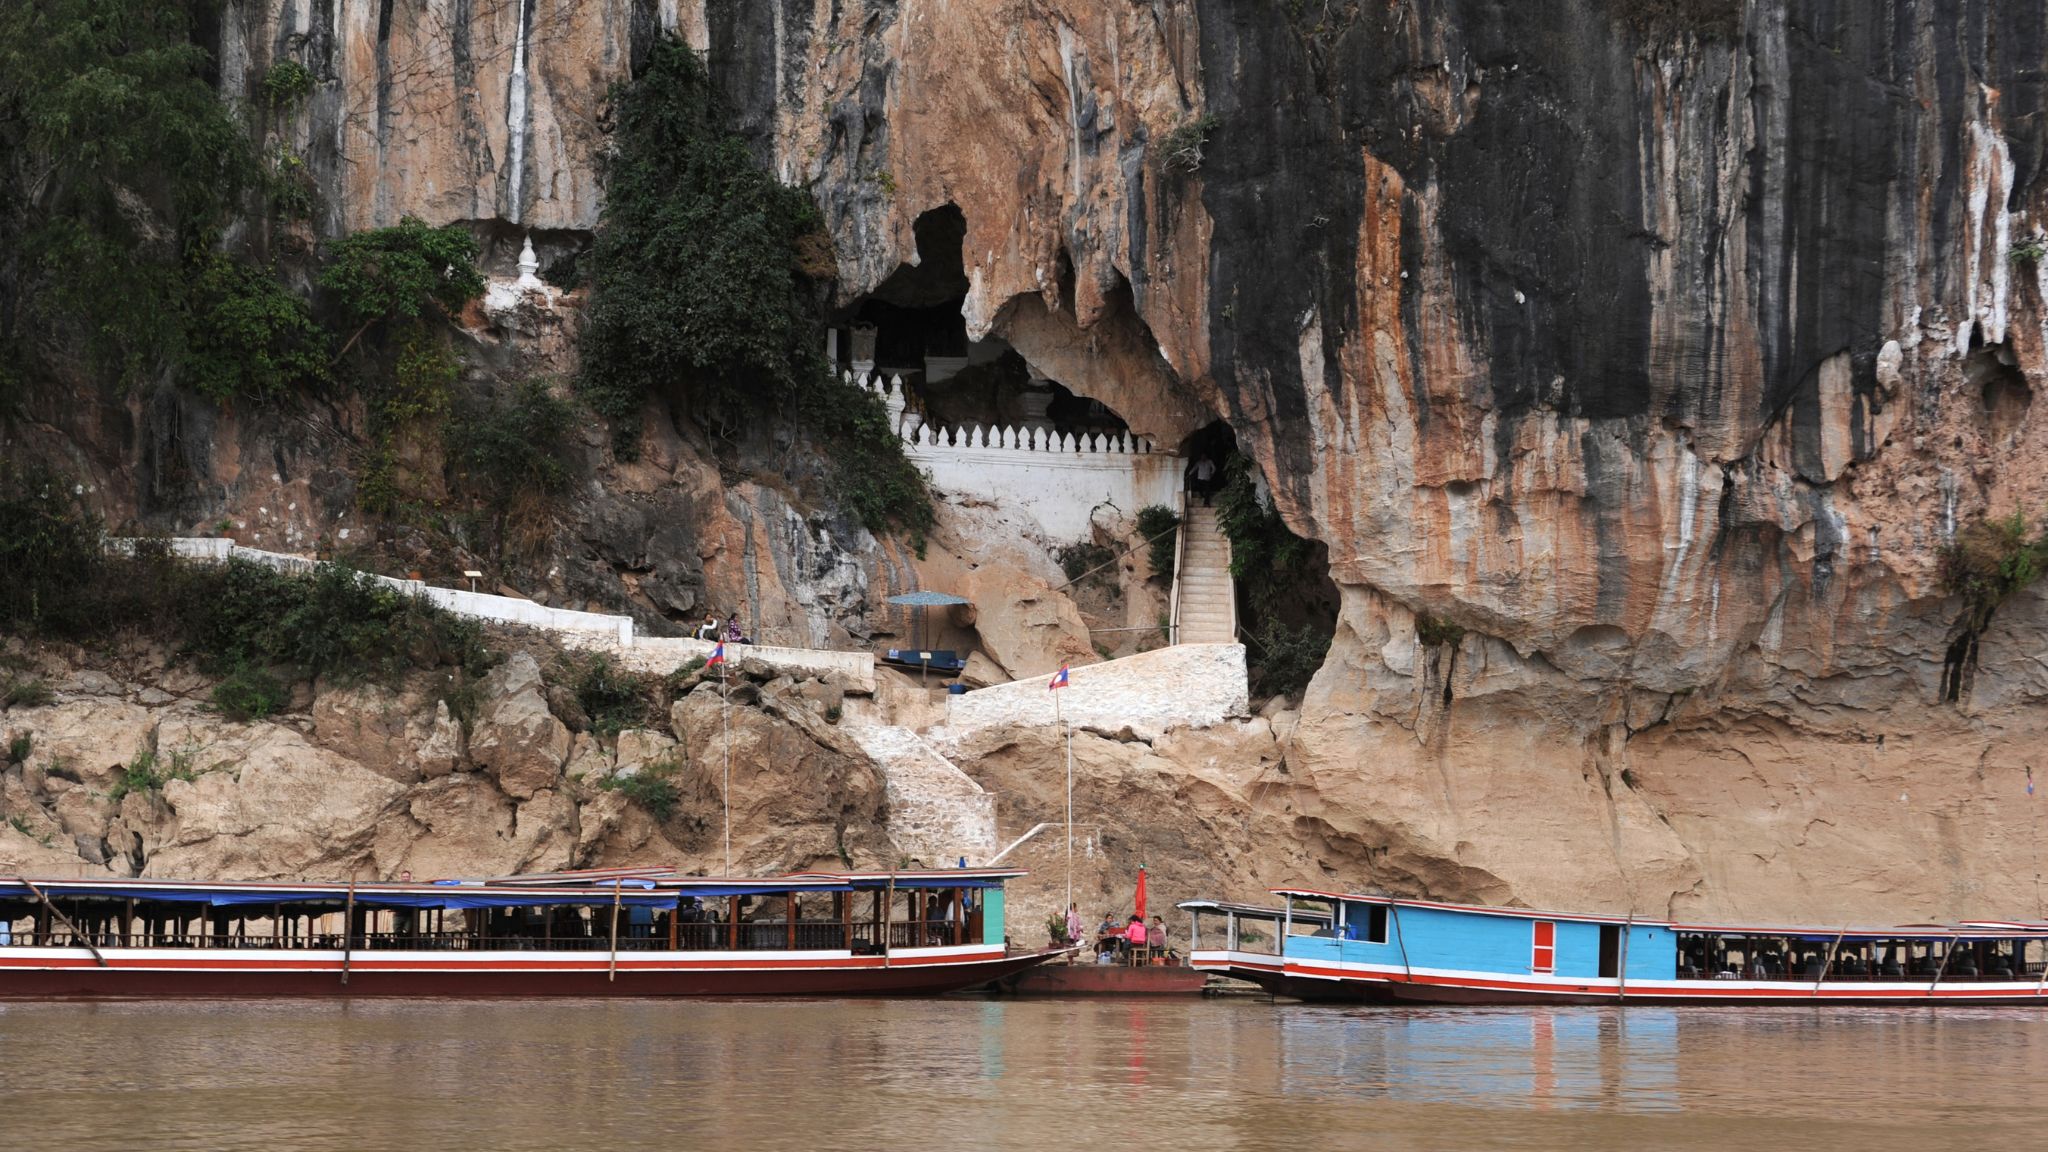 Day 2 Cross The Mekong River To Visit The Pak Ou Cave